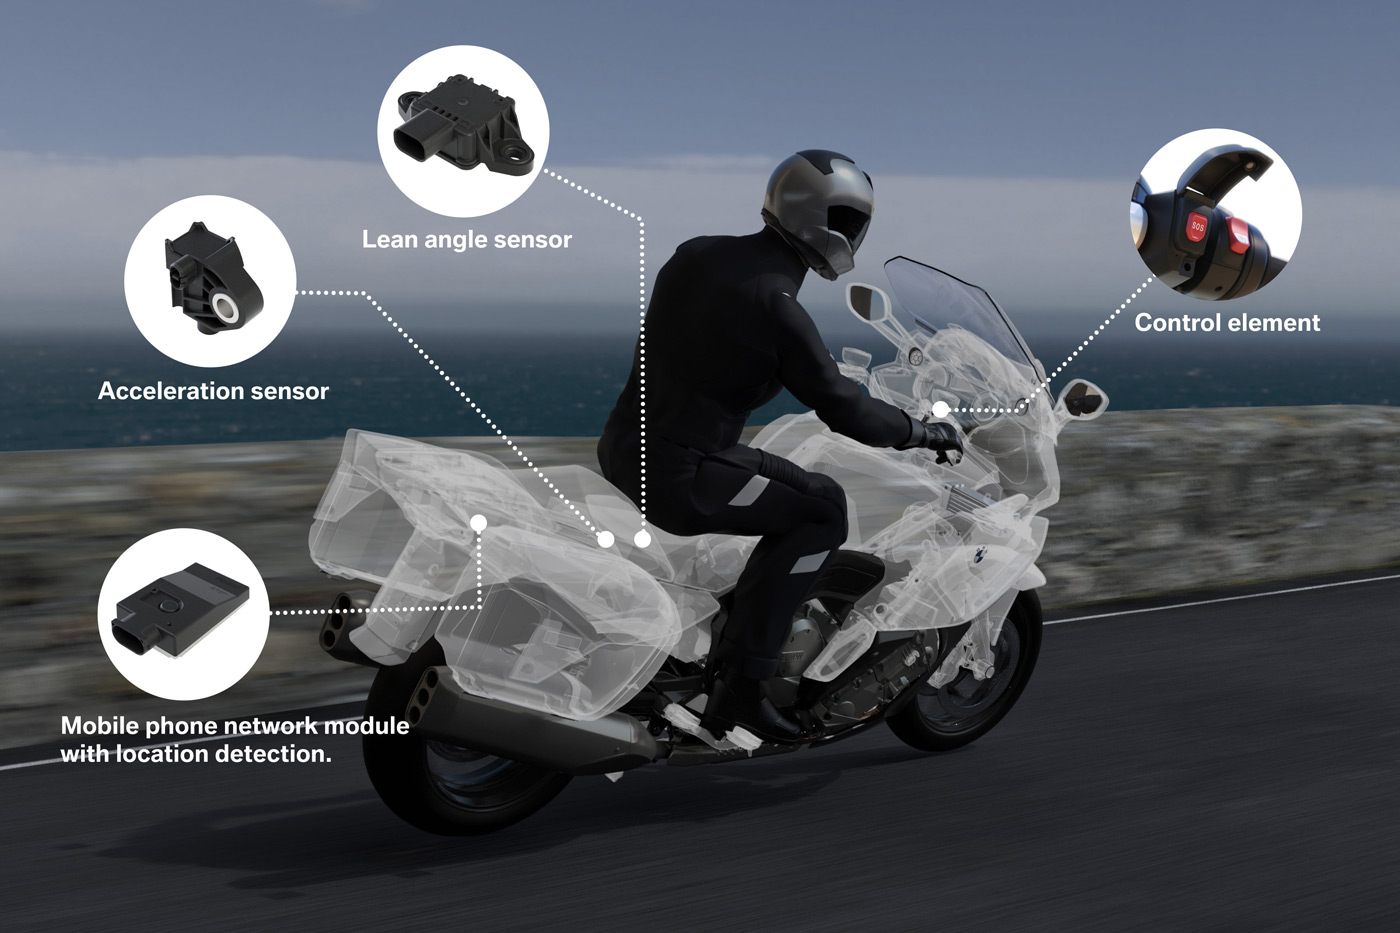 BMW has the first smart emergency system for motorcycles